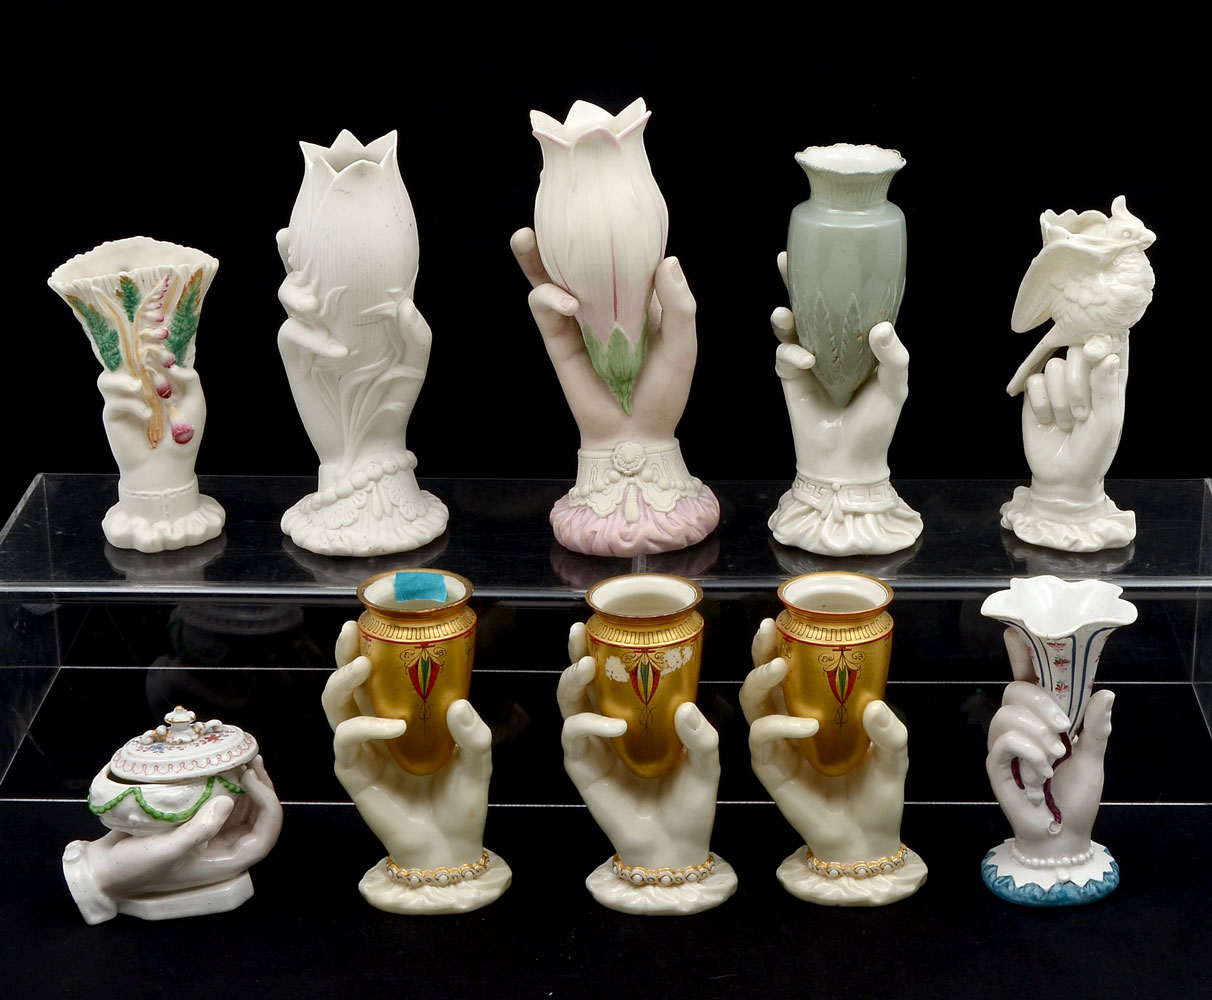 10 PIECE HAND VASE COLLECTION WITH